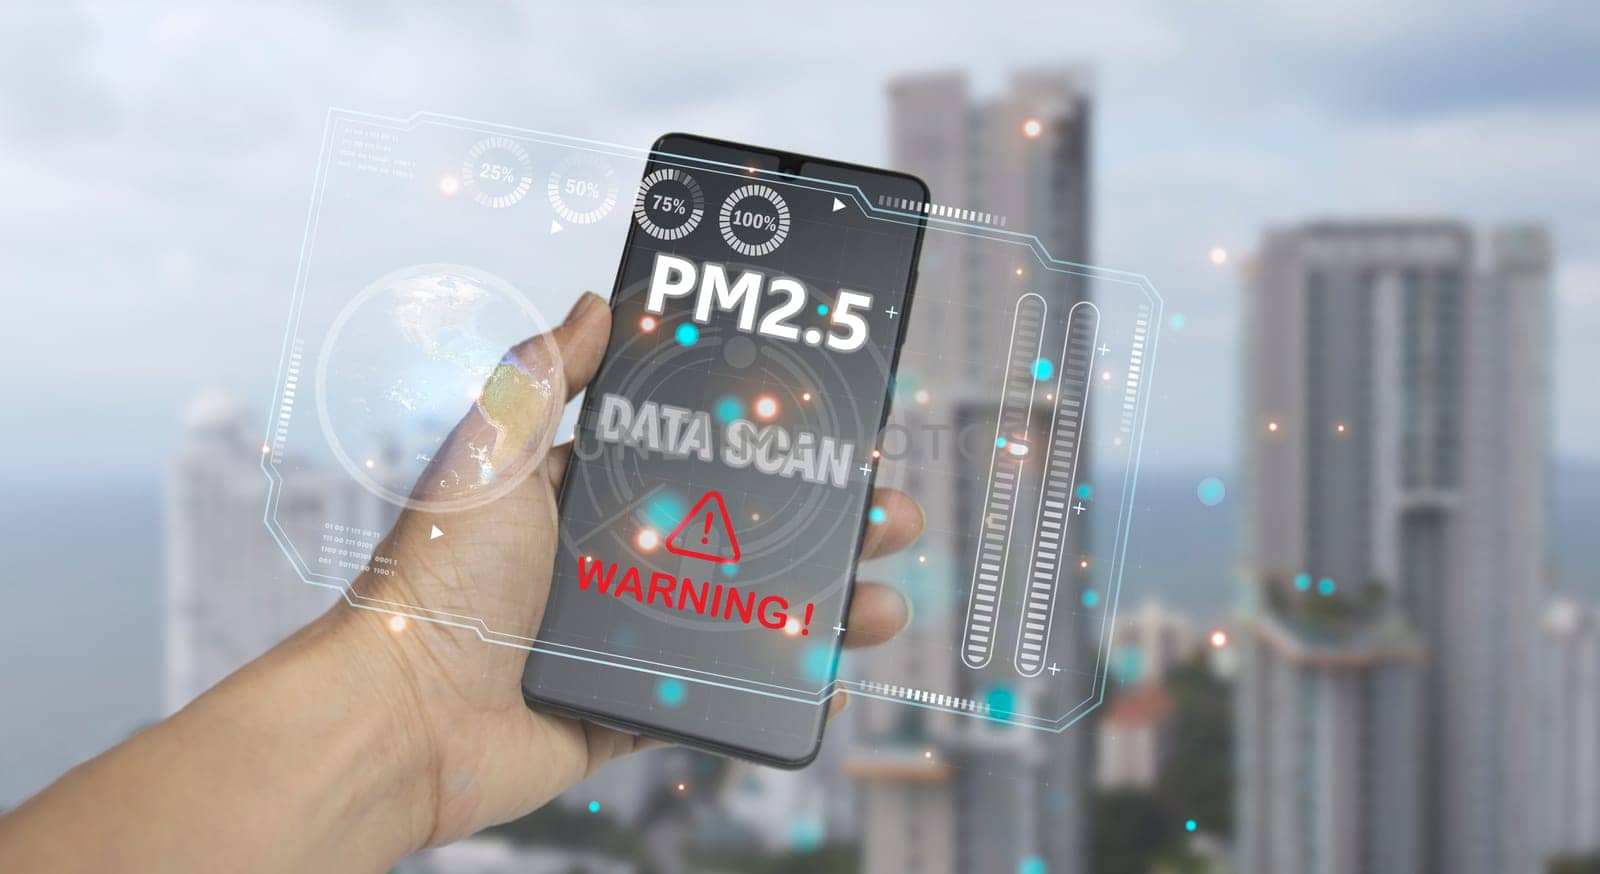 The concept of using a smartphone device To detect PM2.5 dust in the air